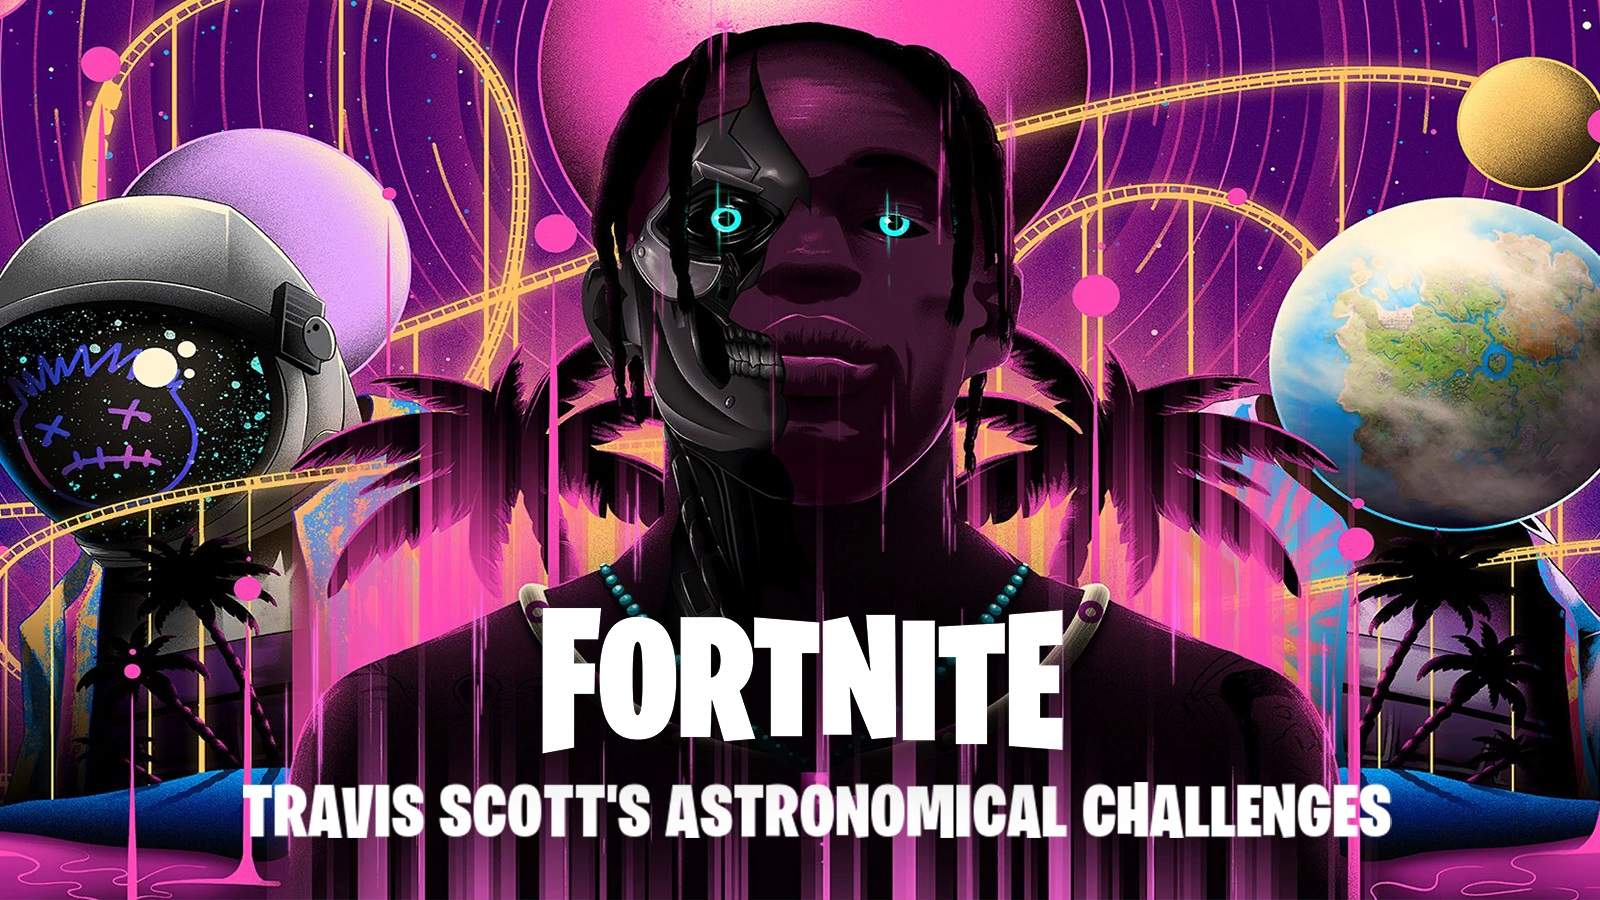 Watch: Travis Scott performs a virtual concert, Astronomical, inside the game Fortnite